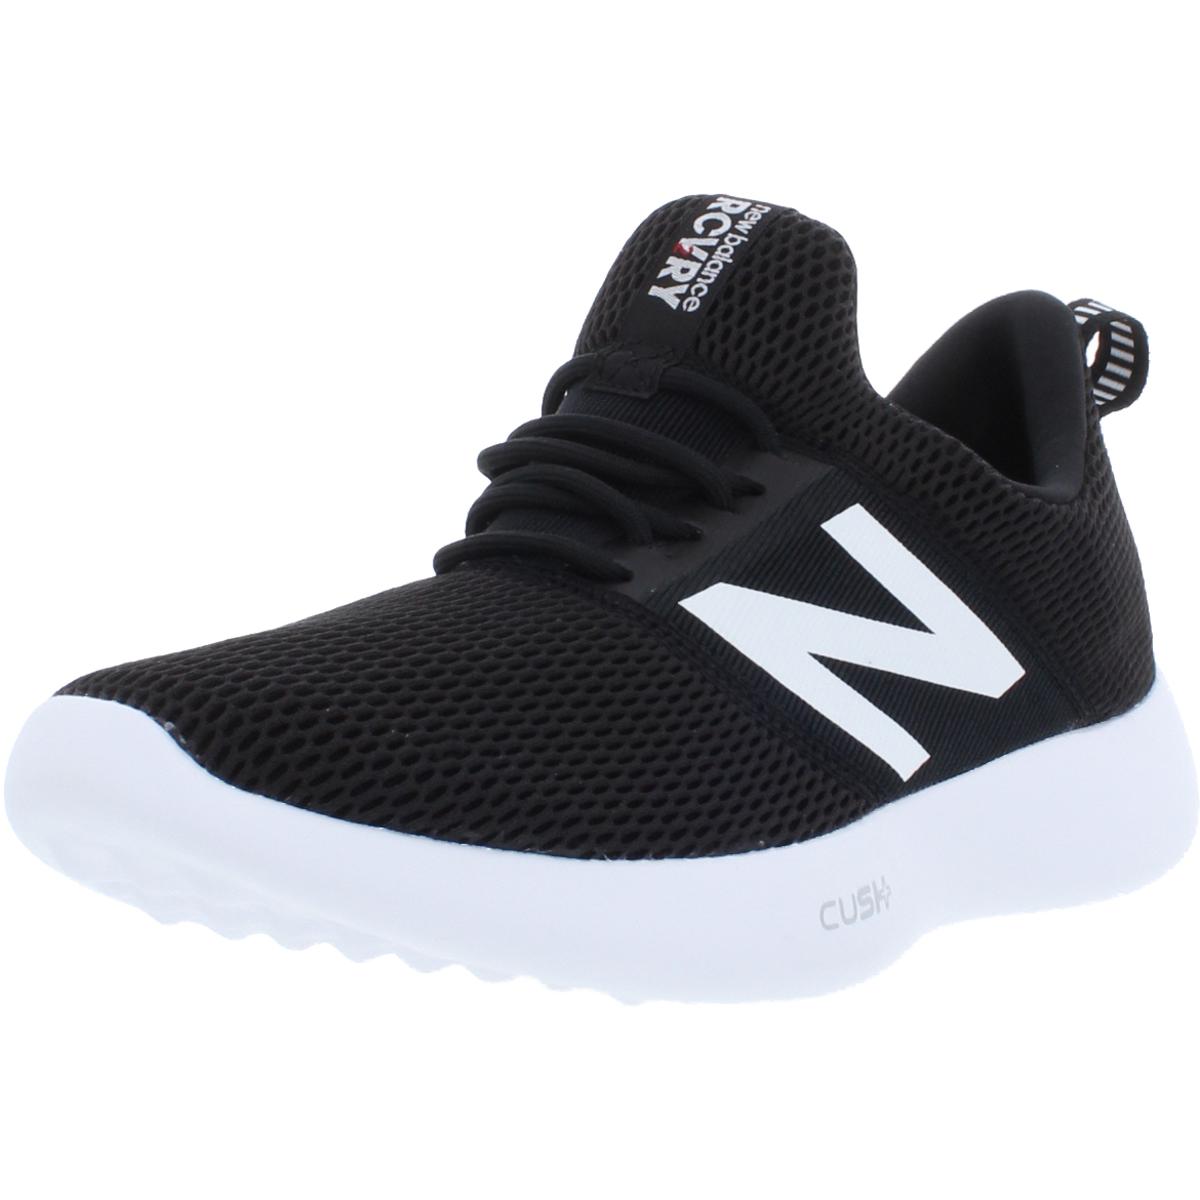 new balance recovery shoes